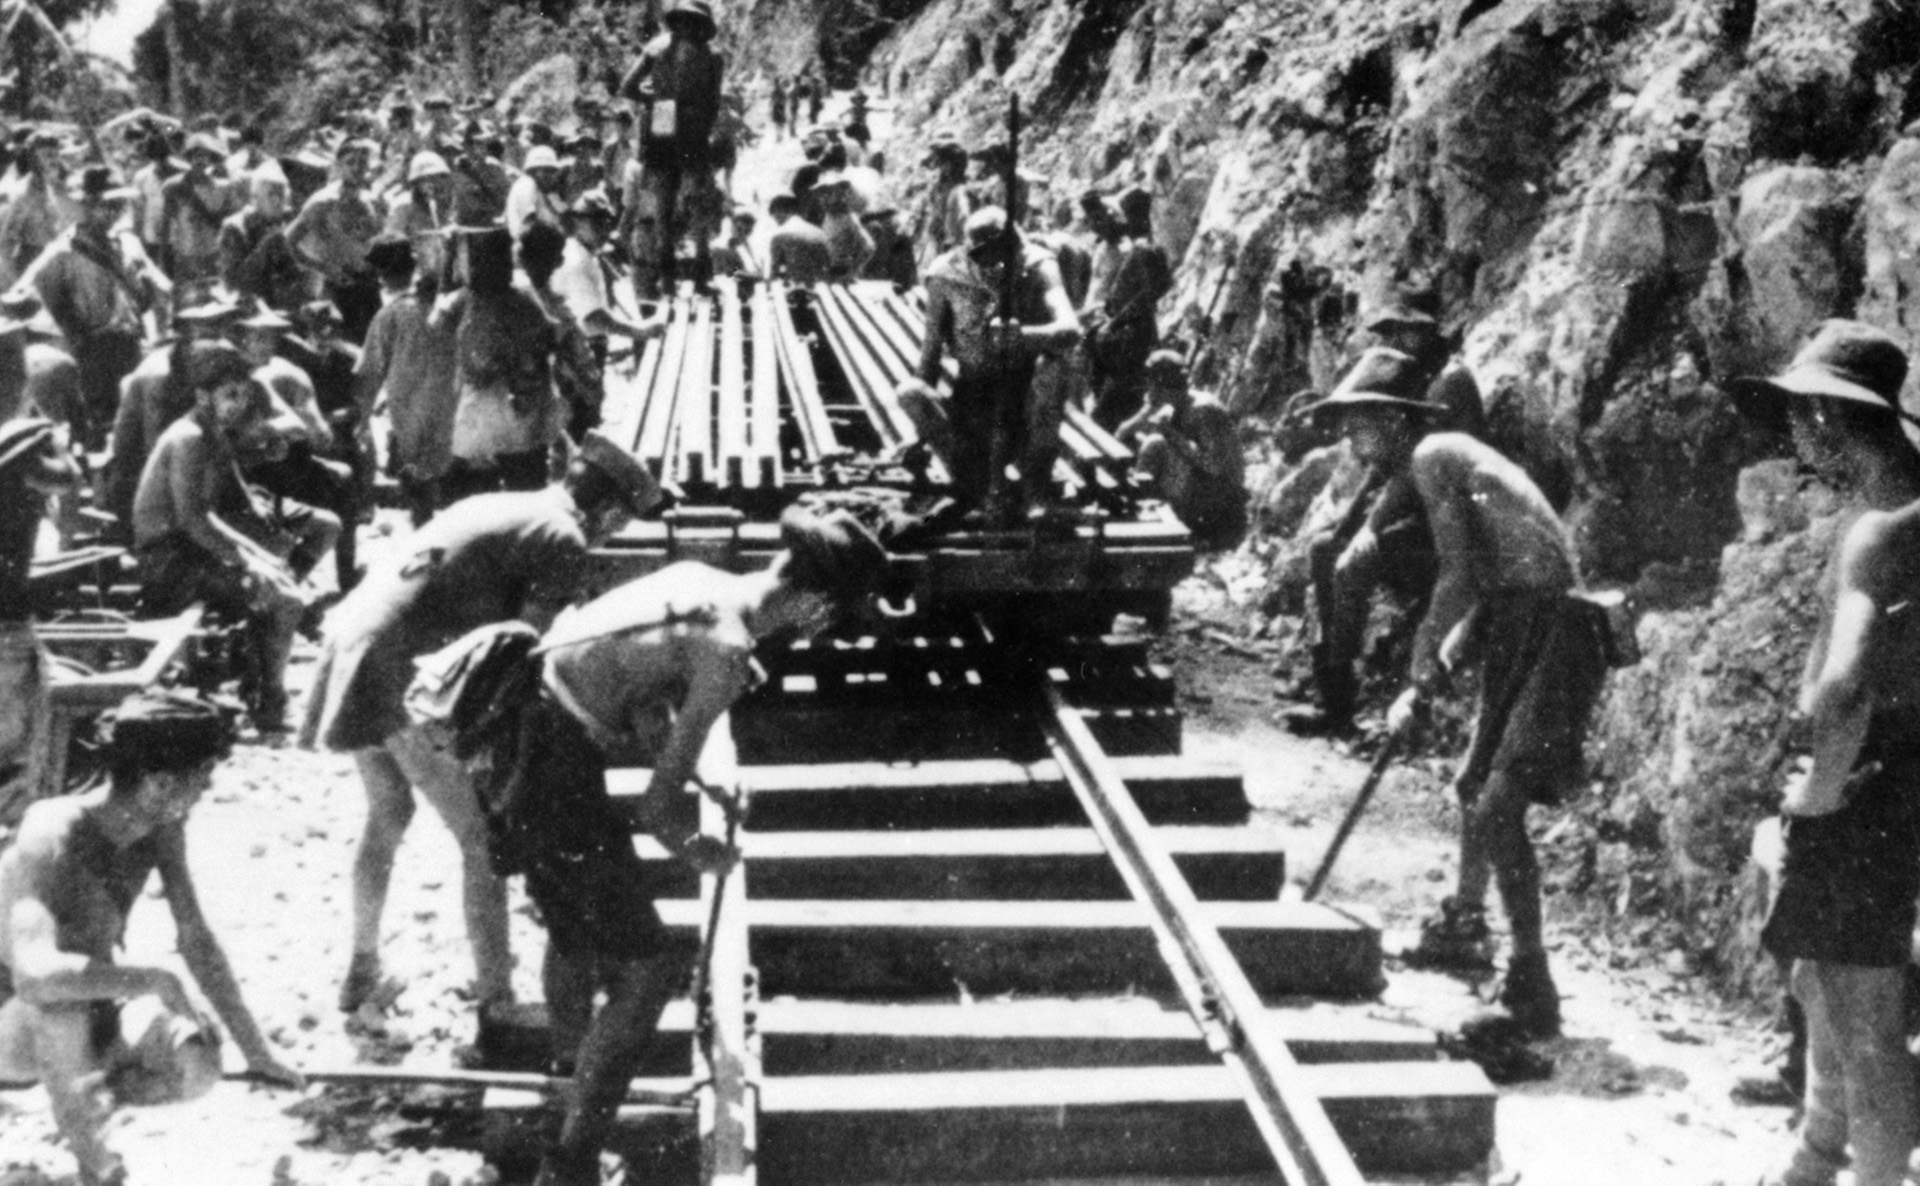 Working under a broiling sun, Australian POWs labor to lay track. Disease and dreadful working conditions—not to mention the brutality of their guards—caused thousands of deaths. Allied warplanes frequently bombed the line, causing further deaths and injuries.